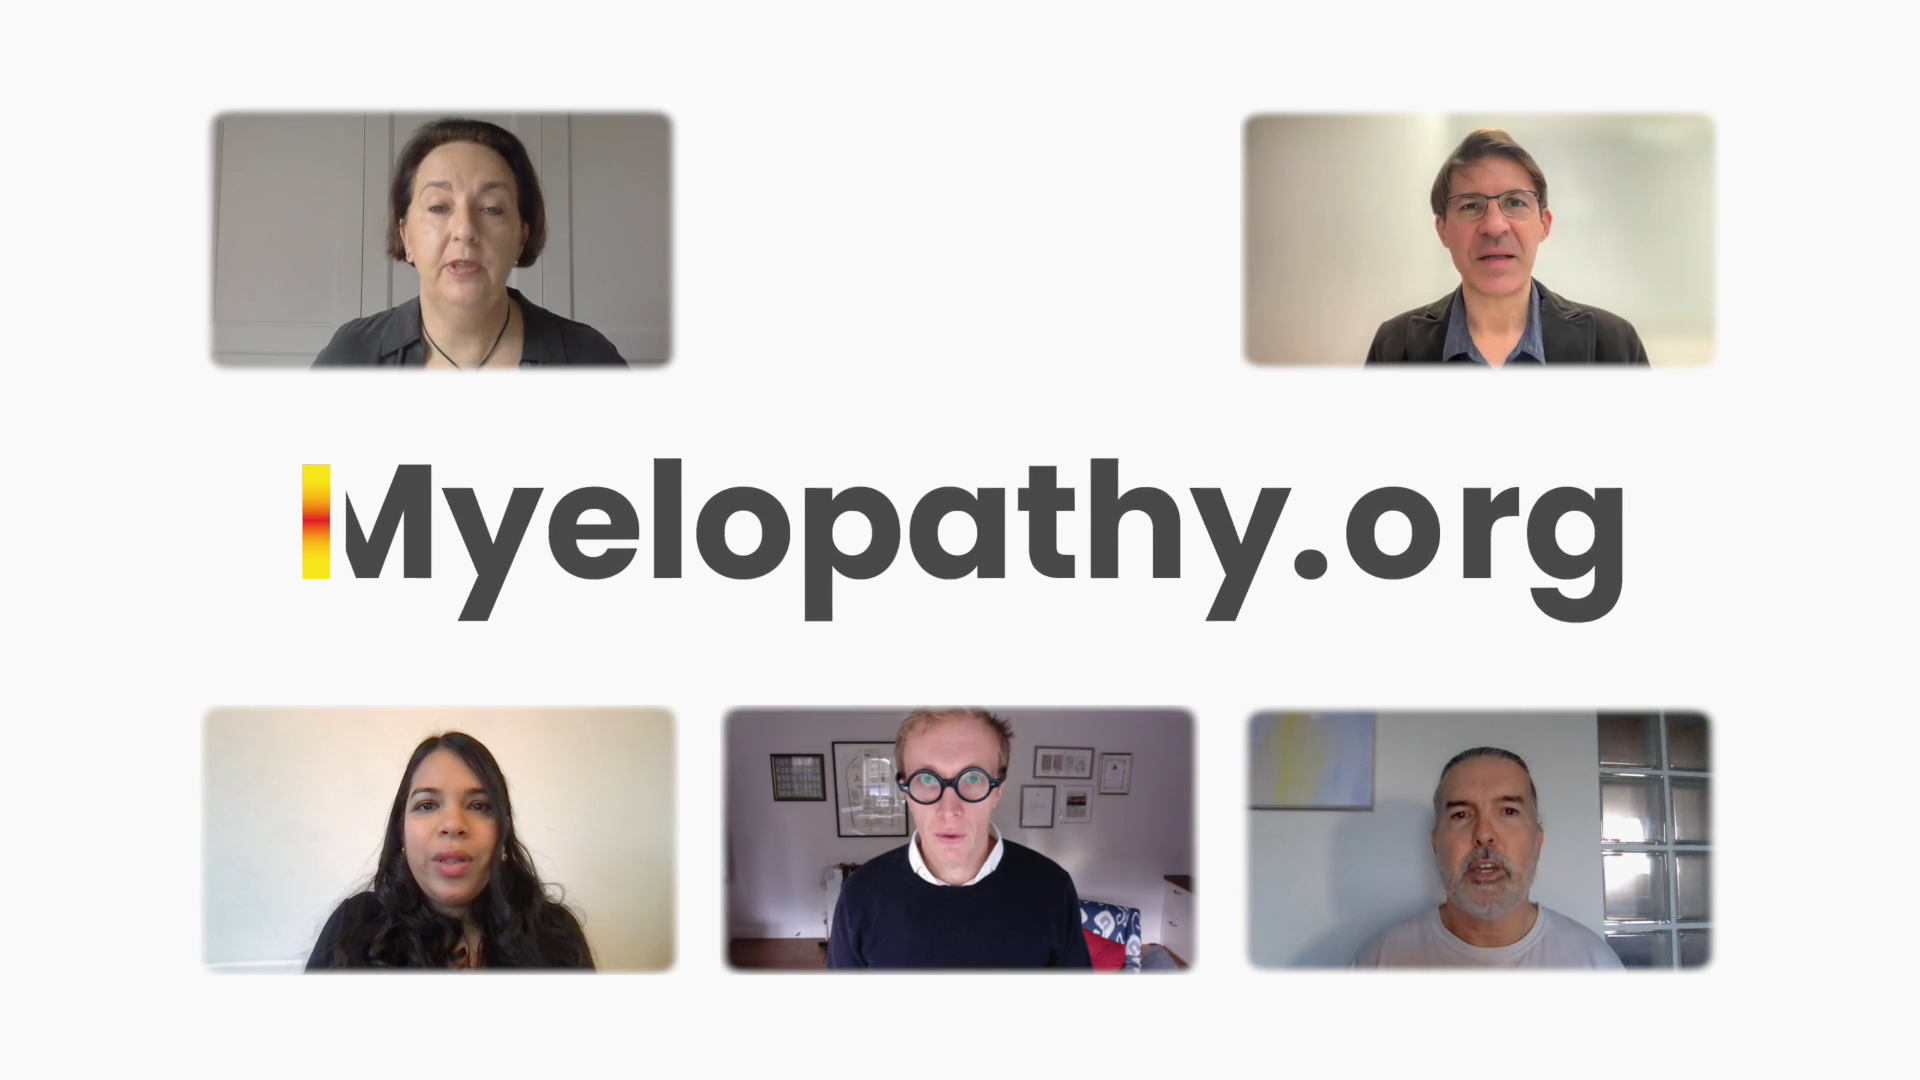 Myelopathy.org introduction video